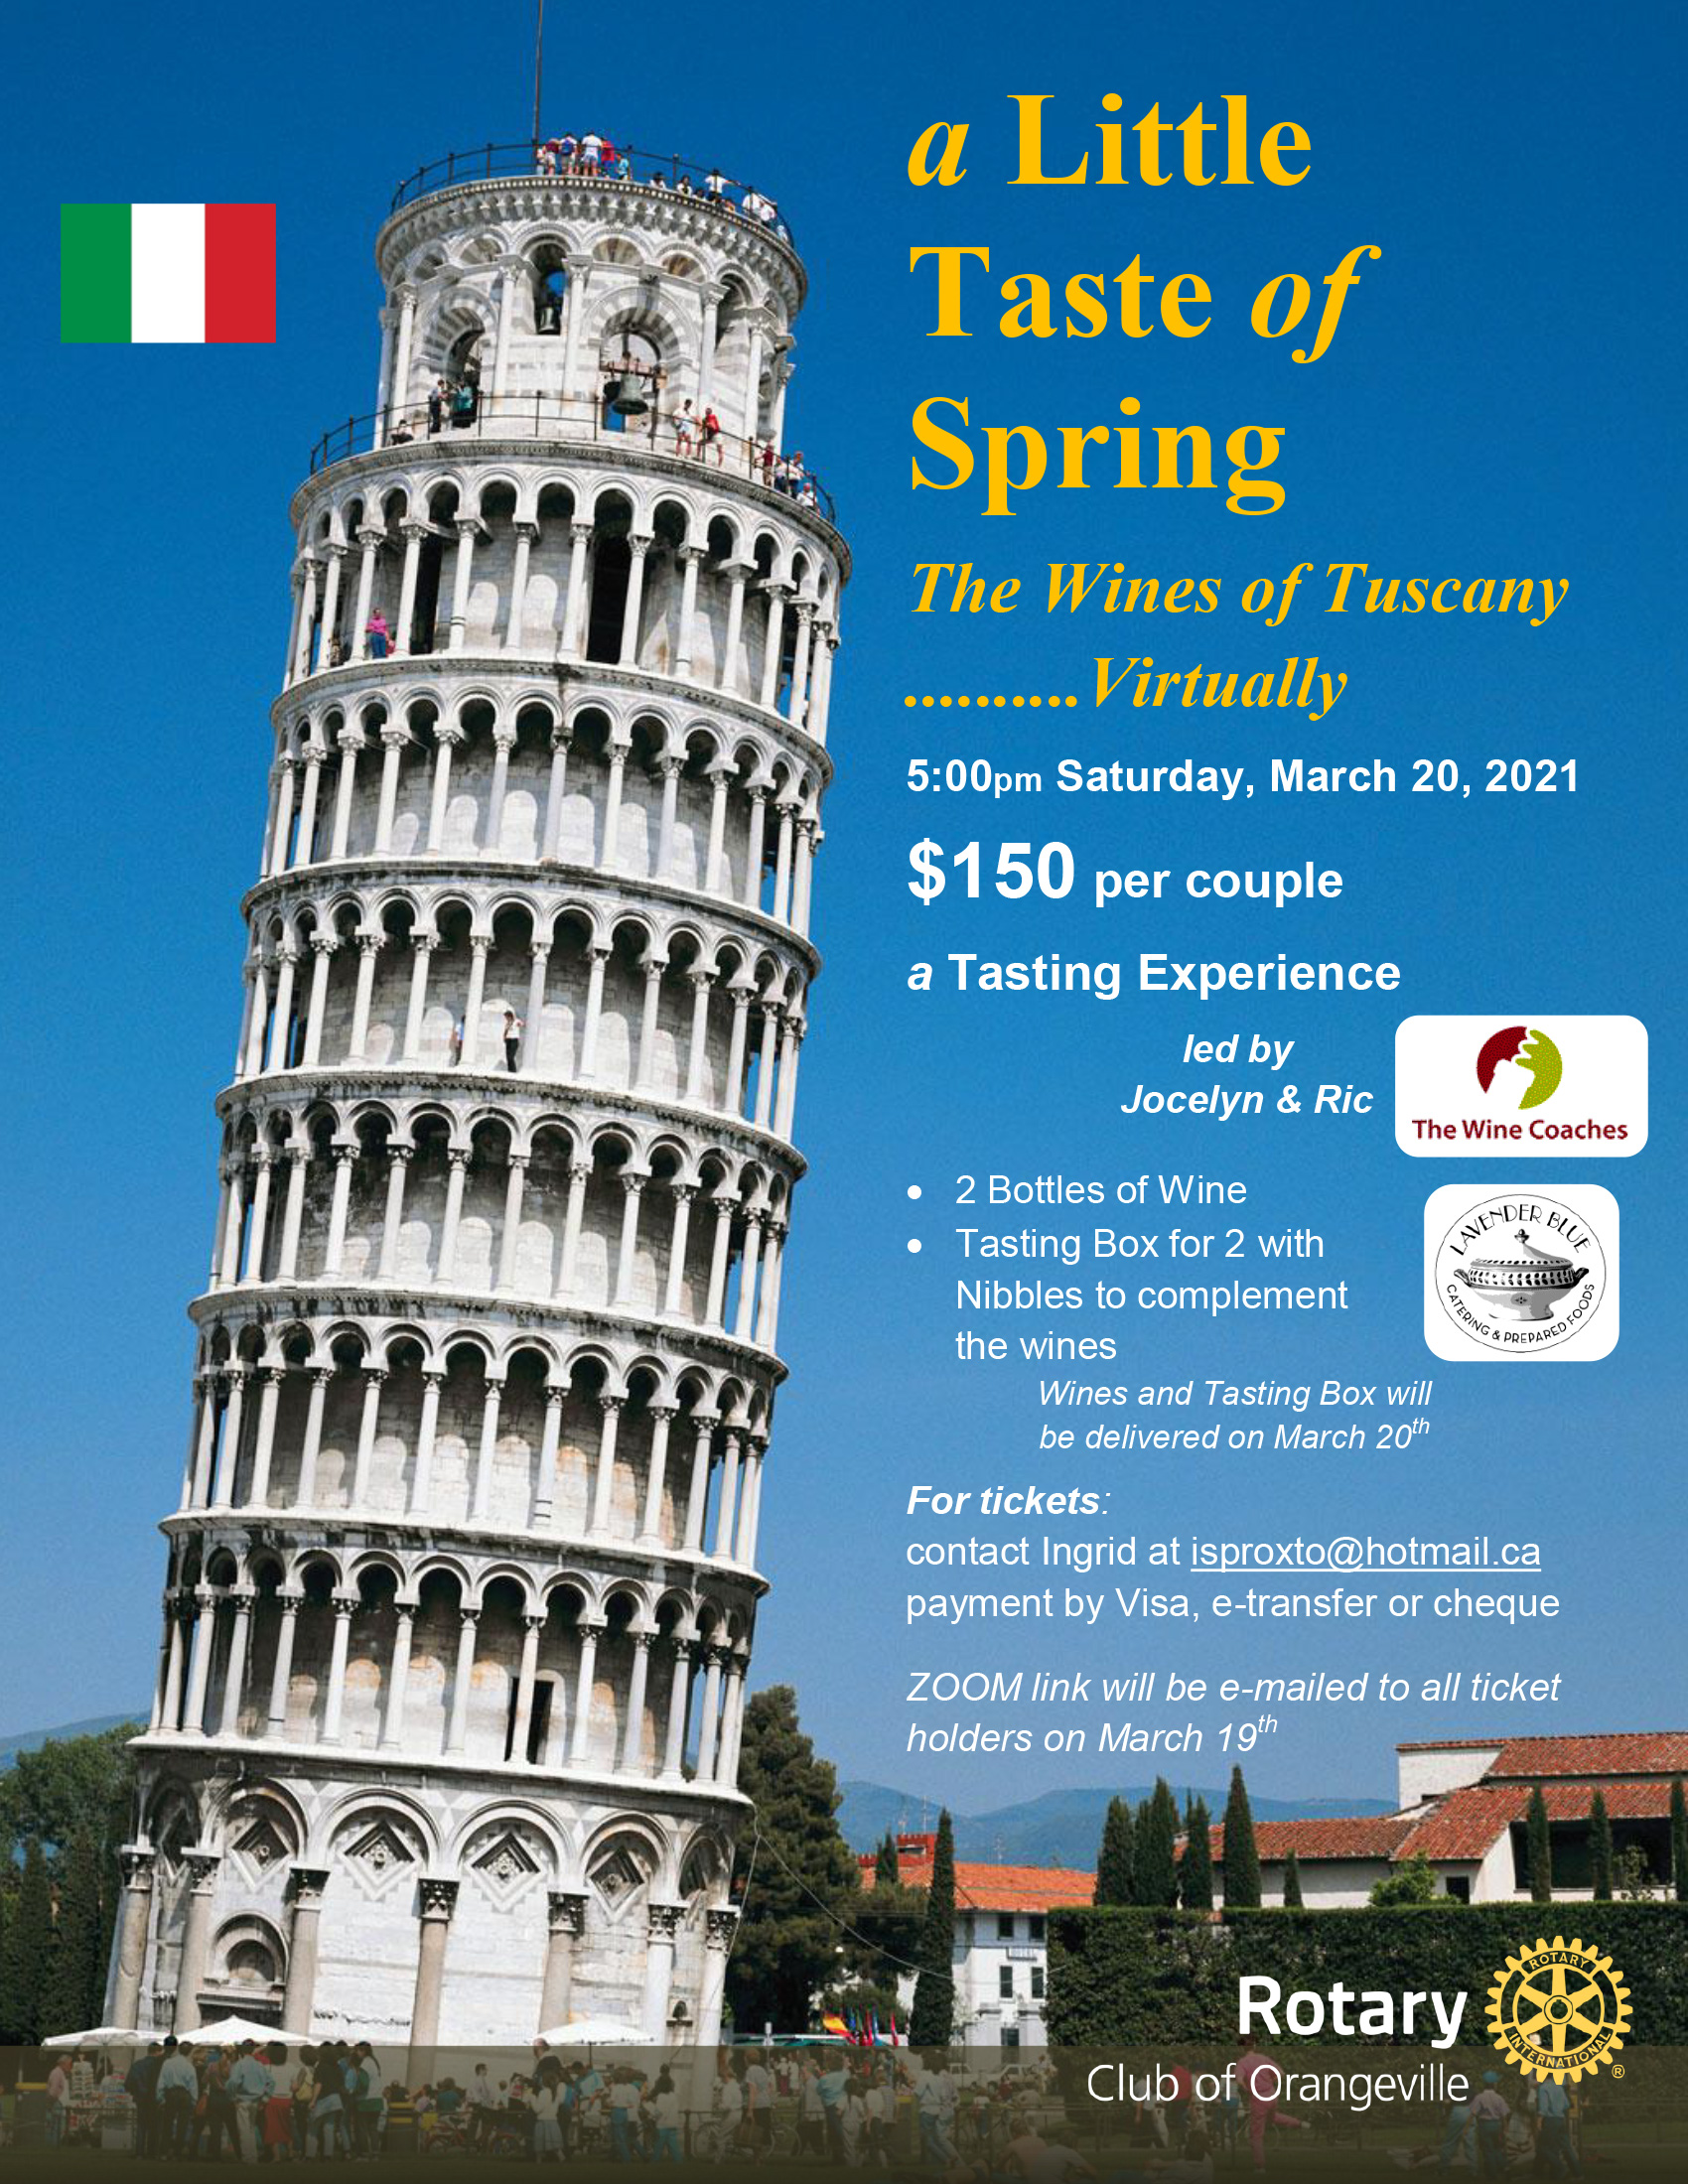 Poster, Tower of Piazza, promoting the Little Taste of Spring Wine Tasting Experience.